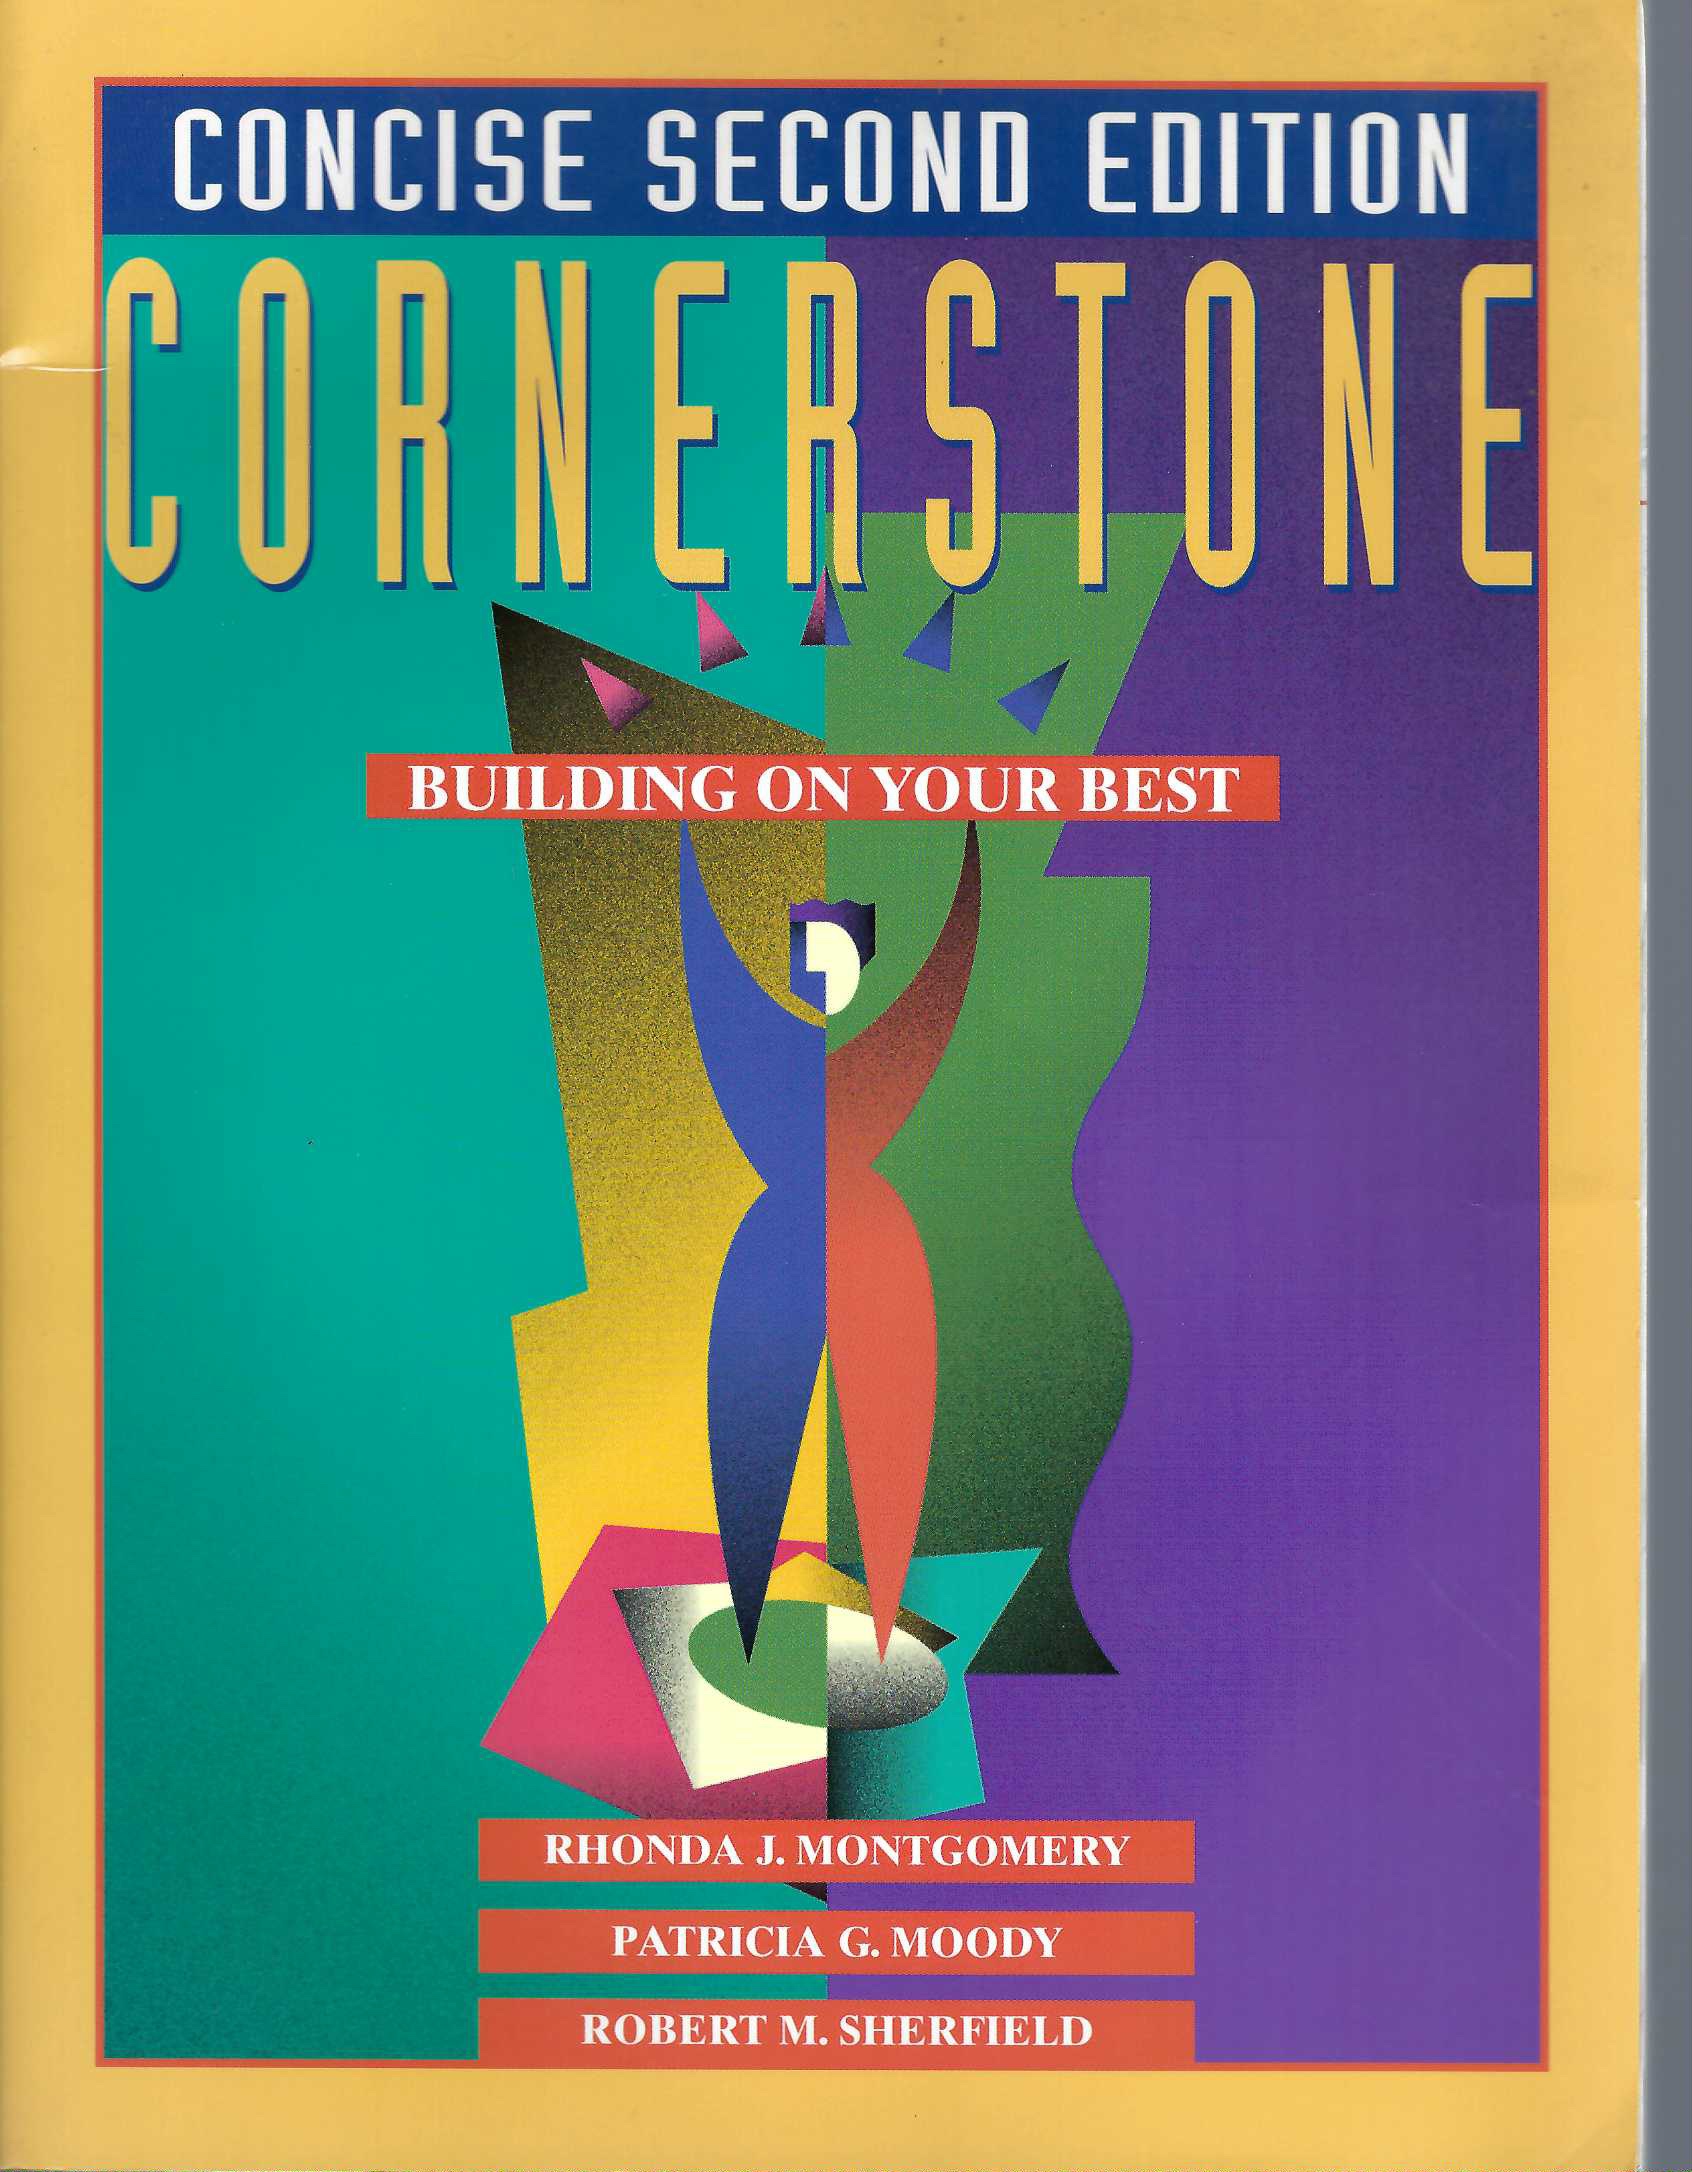 MONTGMERY RHONDA J. - Cornerstone, Building on Your Best, Concise Second Edition